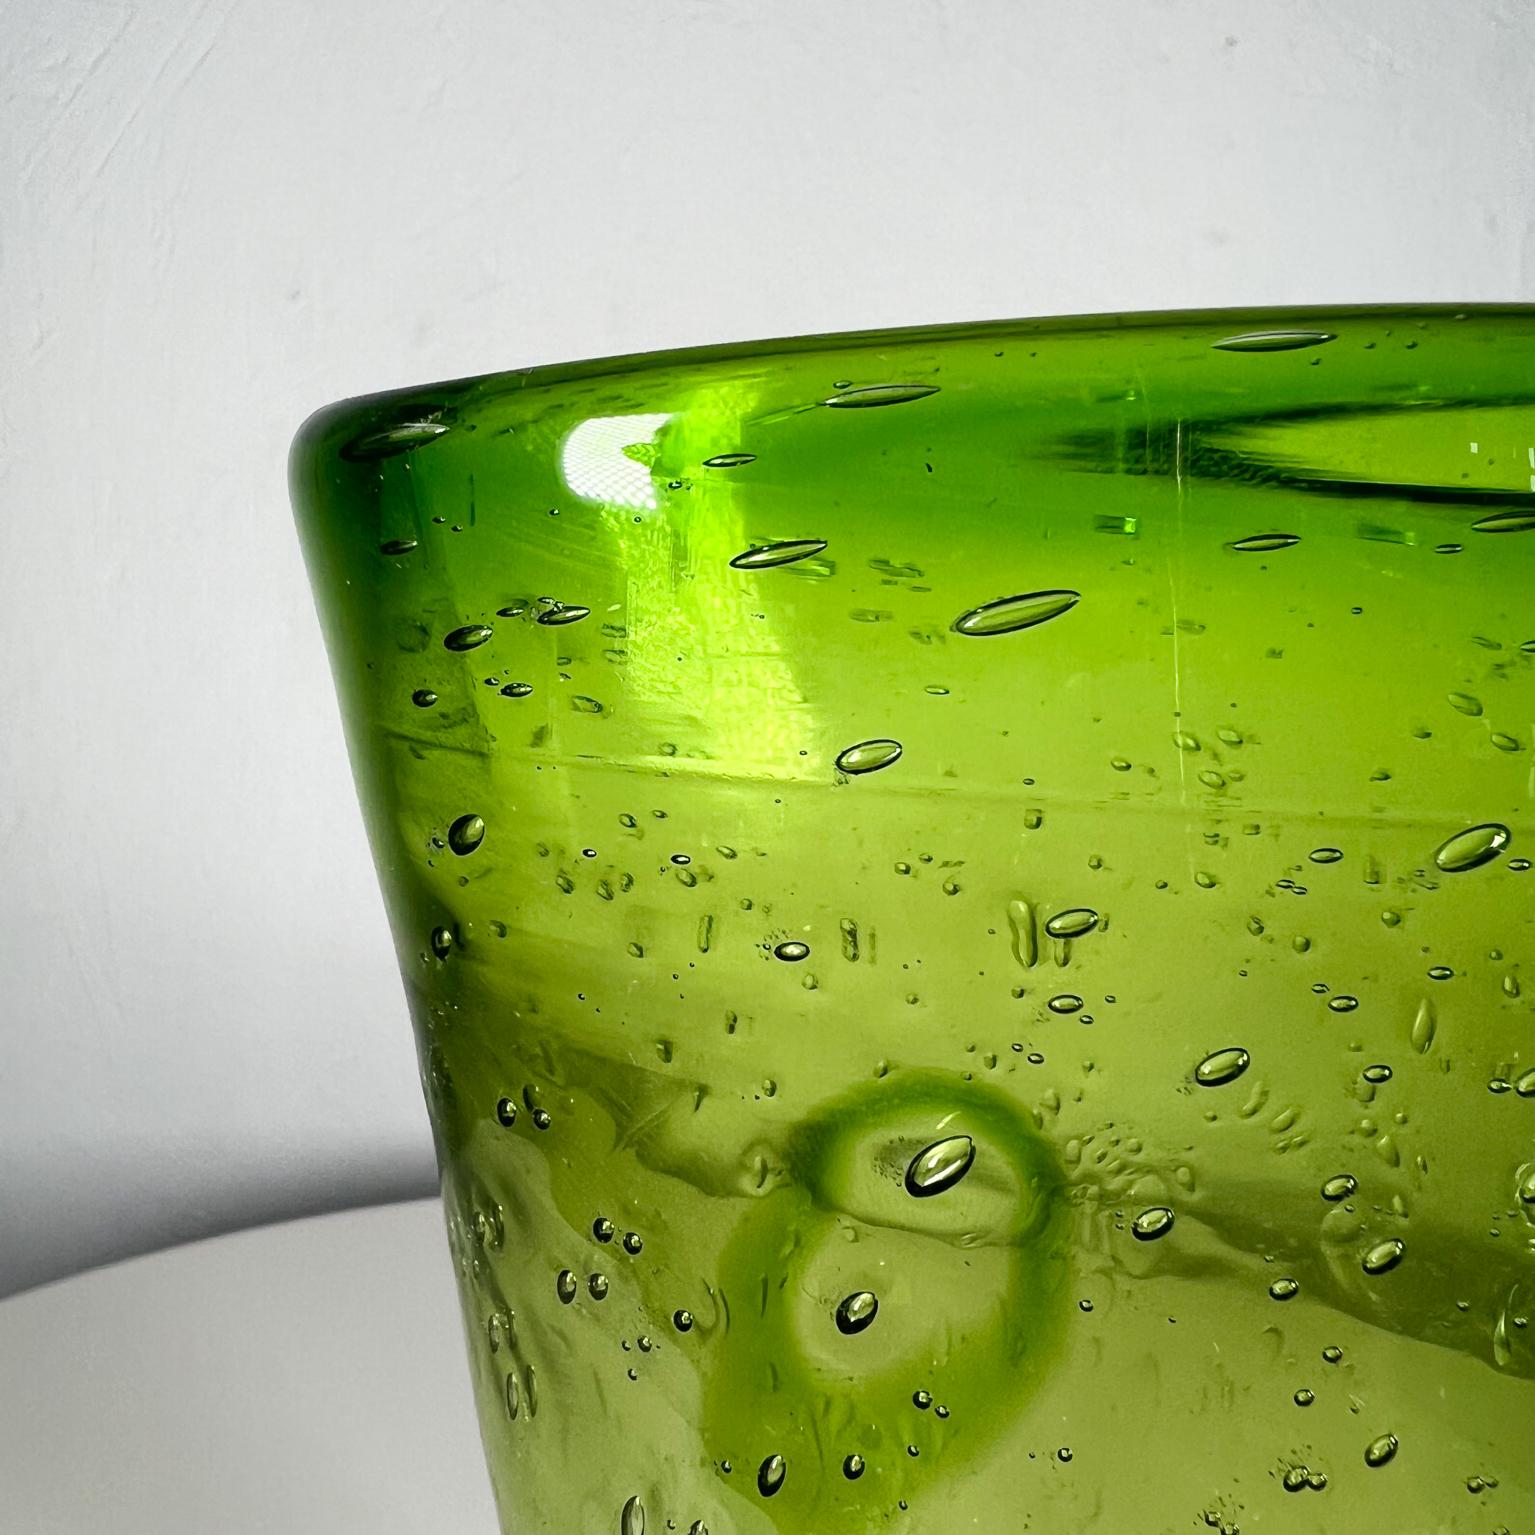 Art glass controlled bubble green modern Murano vase
9.38 tall x 6.13 w x 3.63 d
Unmarked
Preowned vintage condition, refer to images.